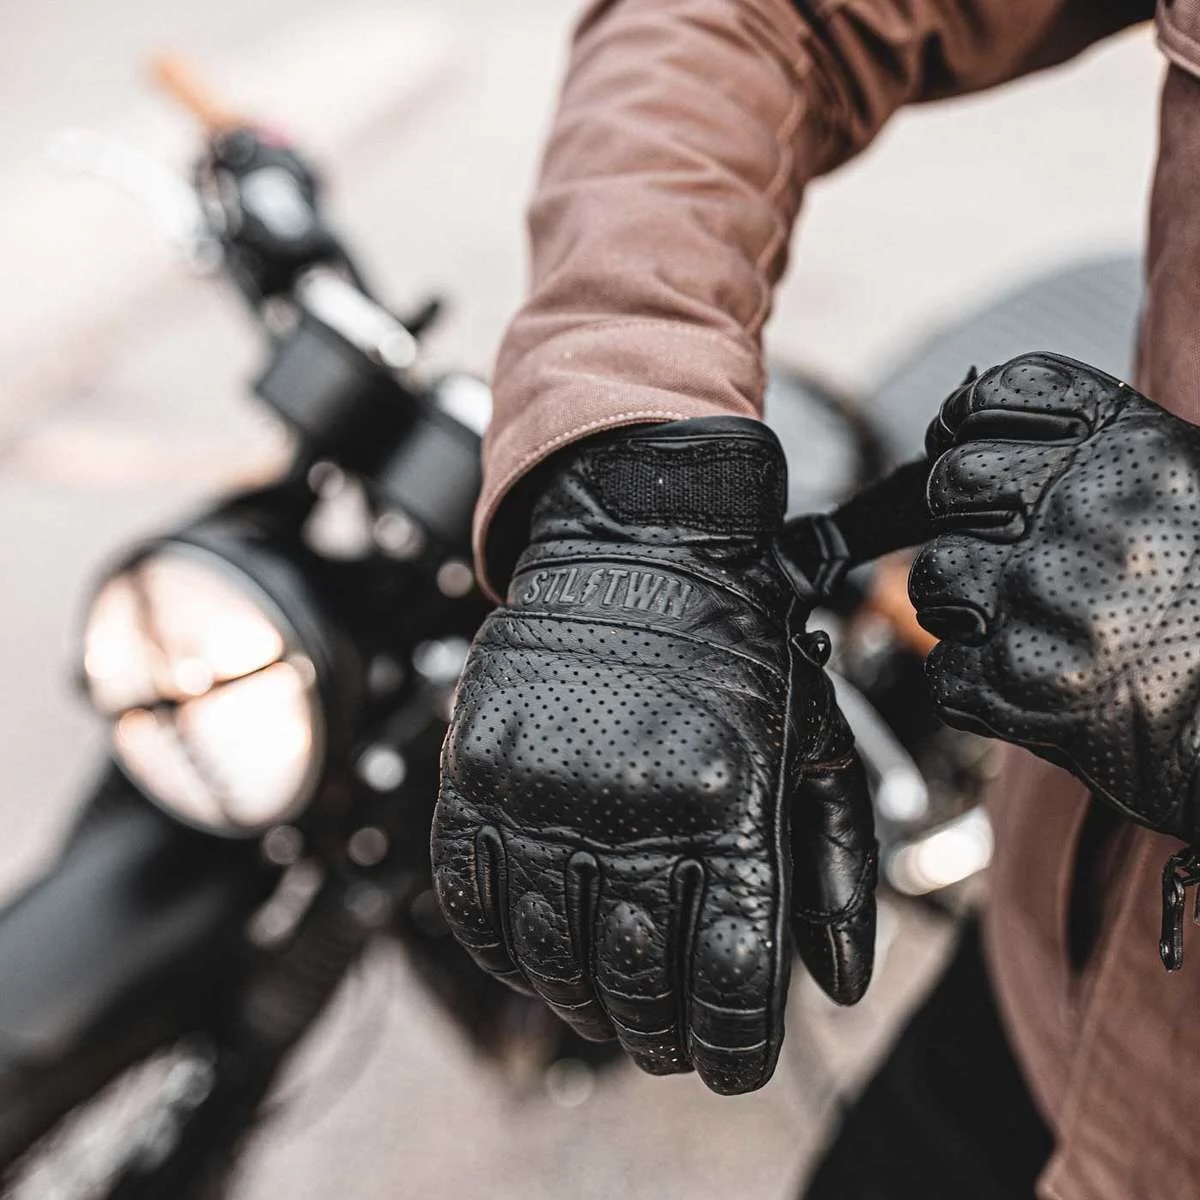 Motorcycle Gloves Review: Find the Perfect Pair for Your Ride